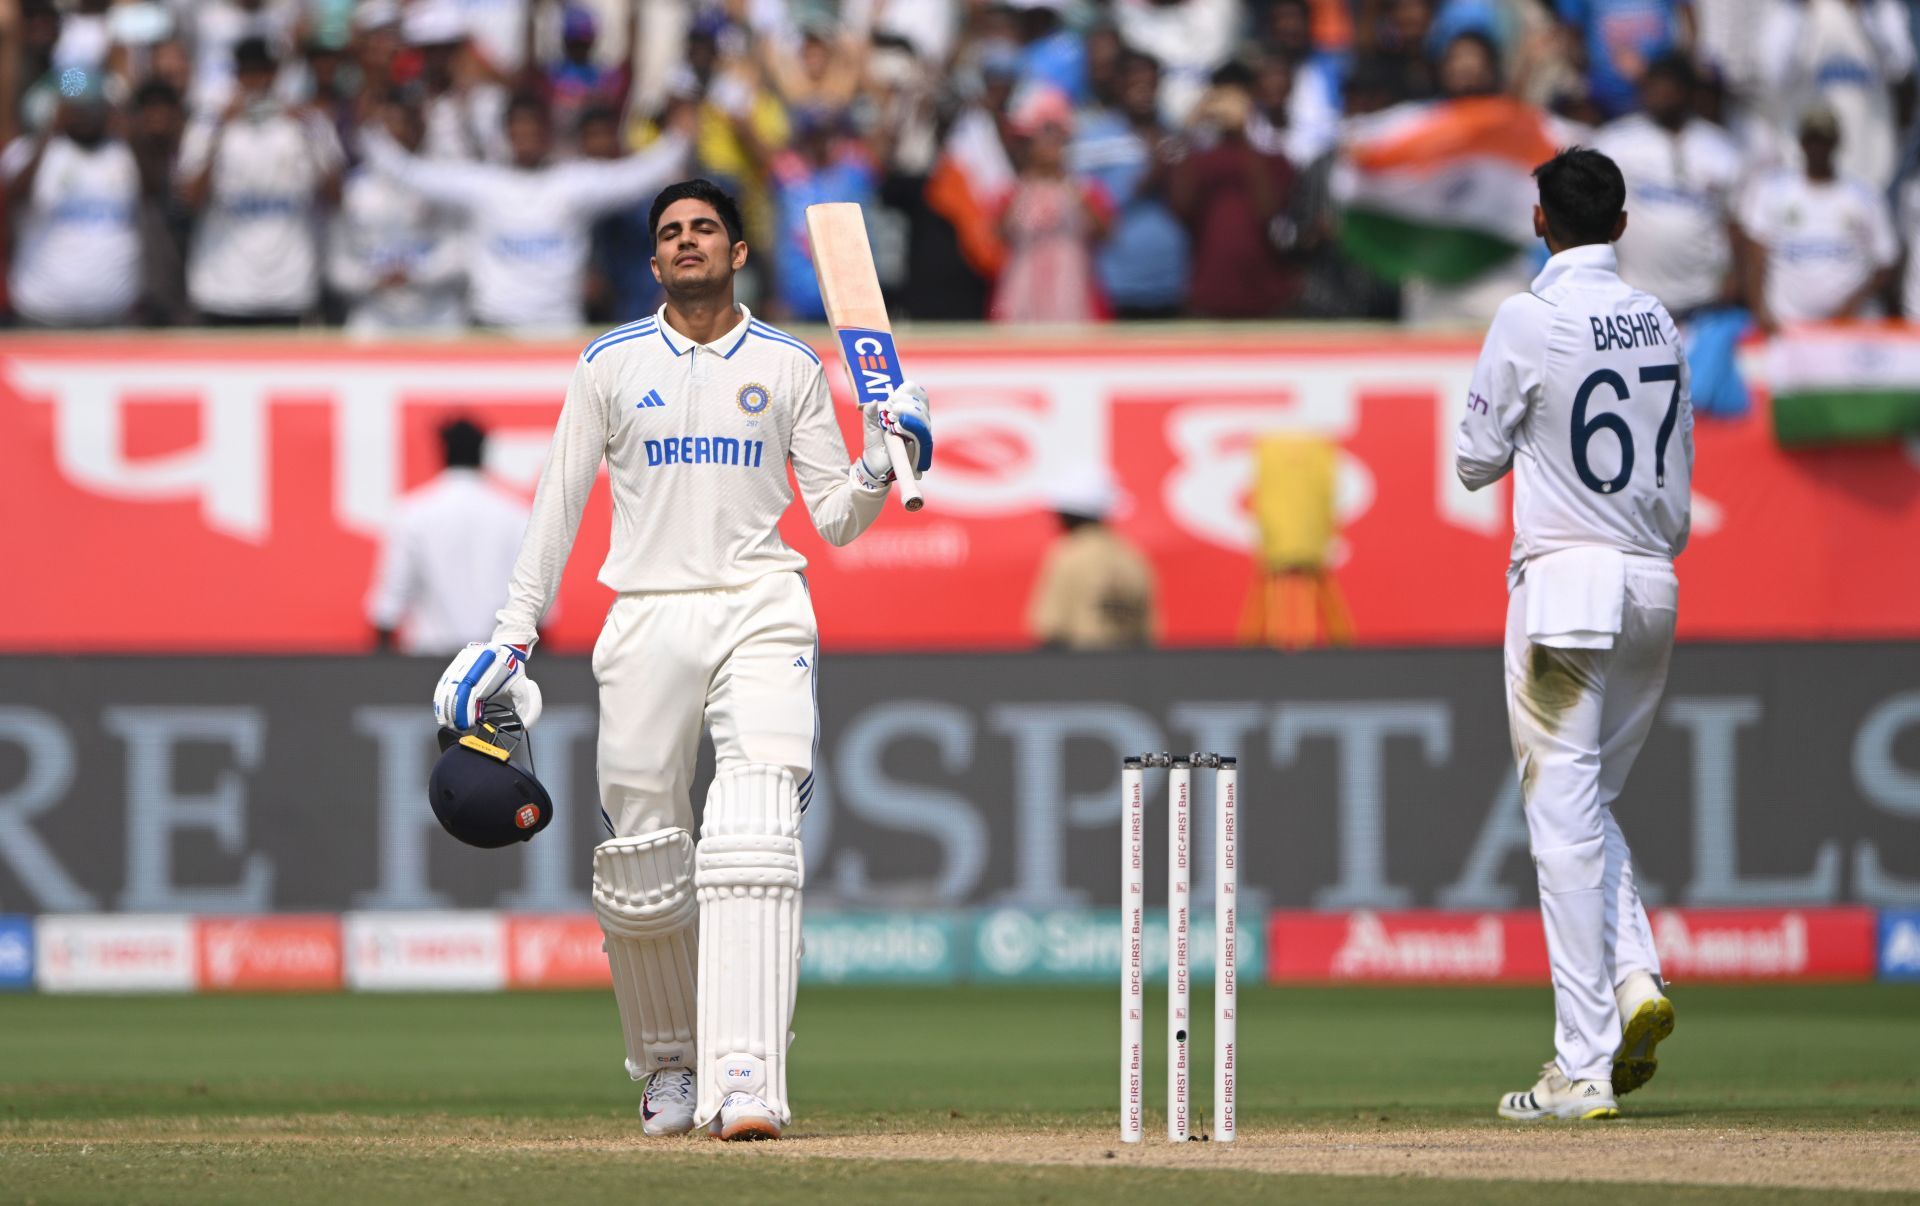 Shubman Gill had a muted celebration after reaching his century. [P/C: Getty]